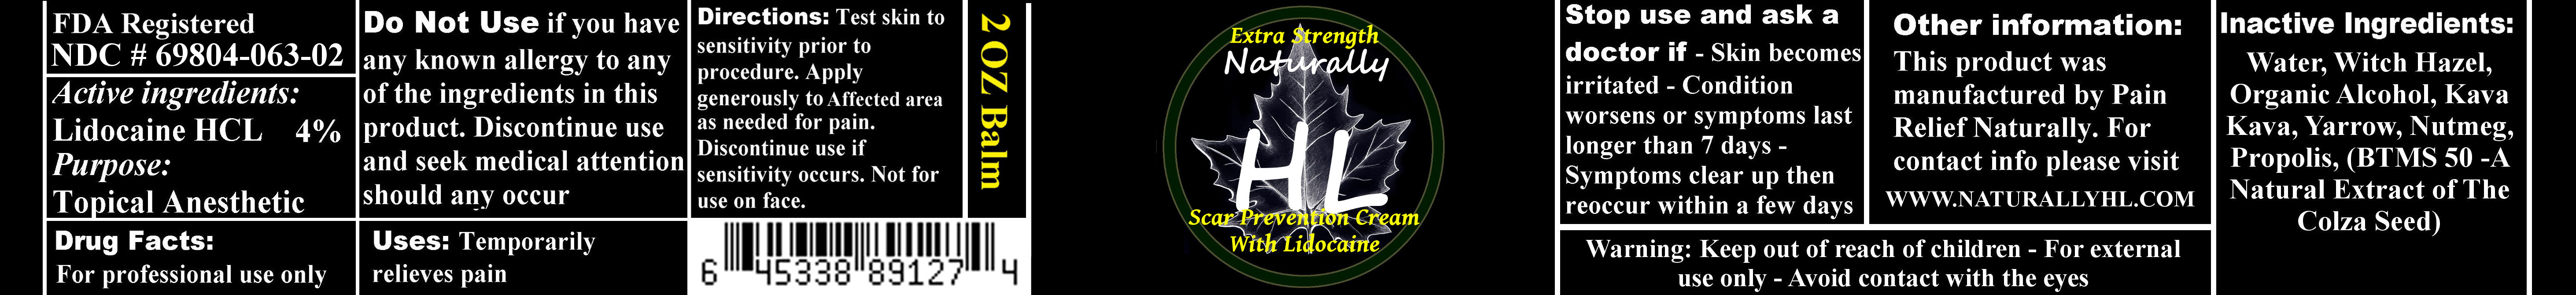 Extra Strength Scar Prevention | Lidocaine Hcl Cream while Breastfeeding